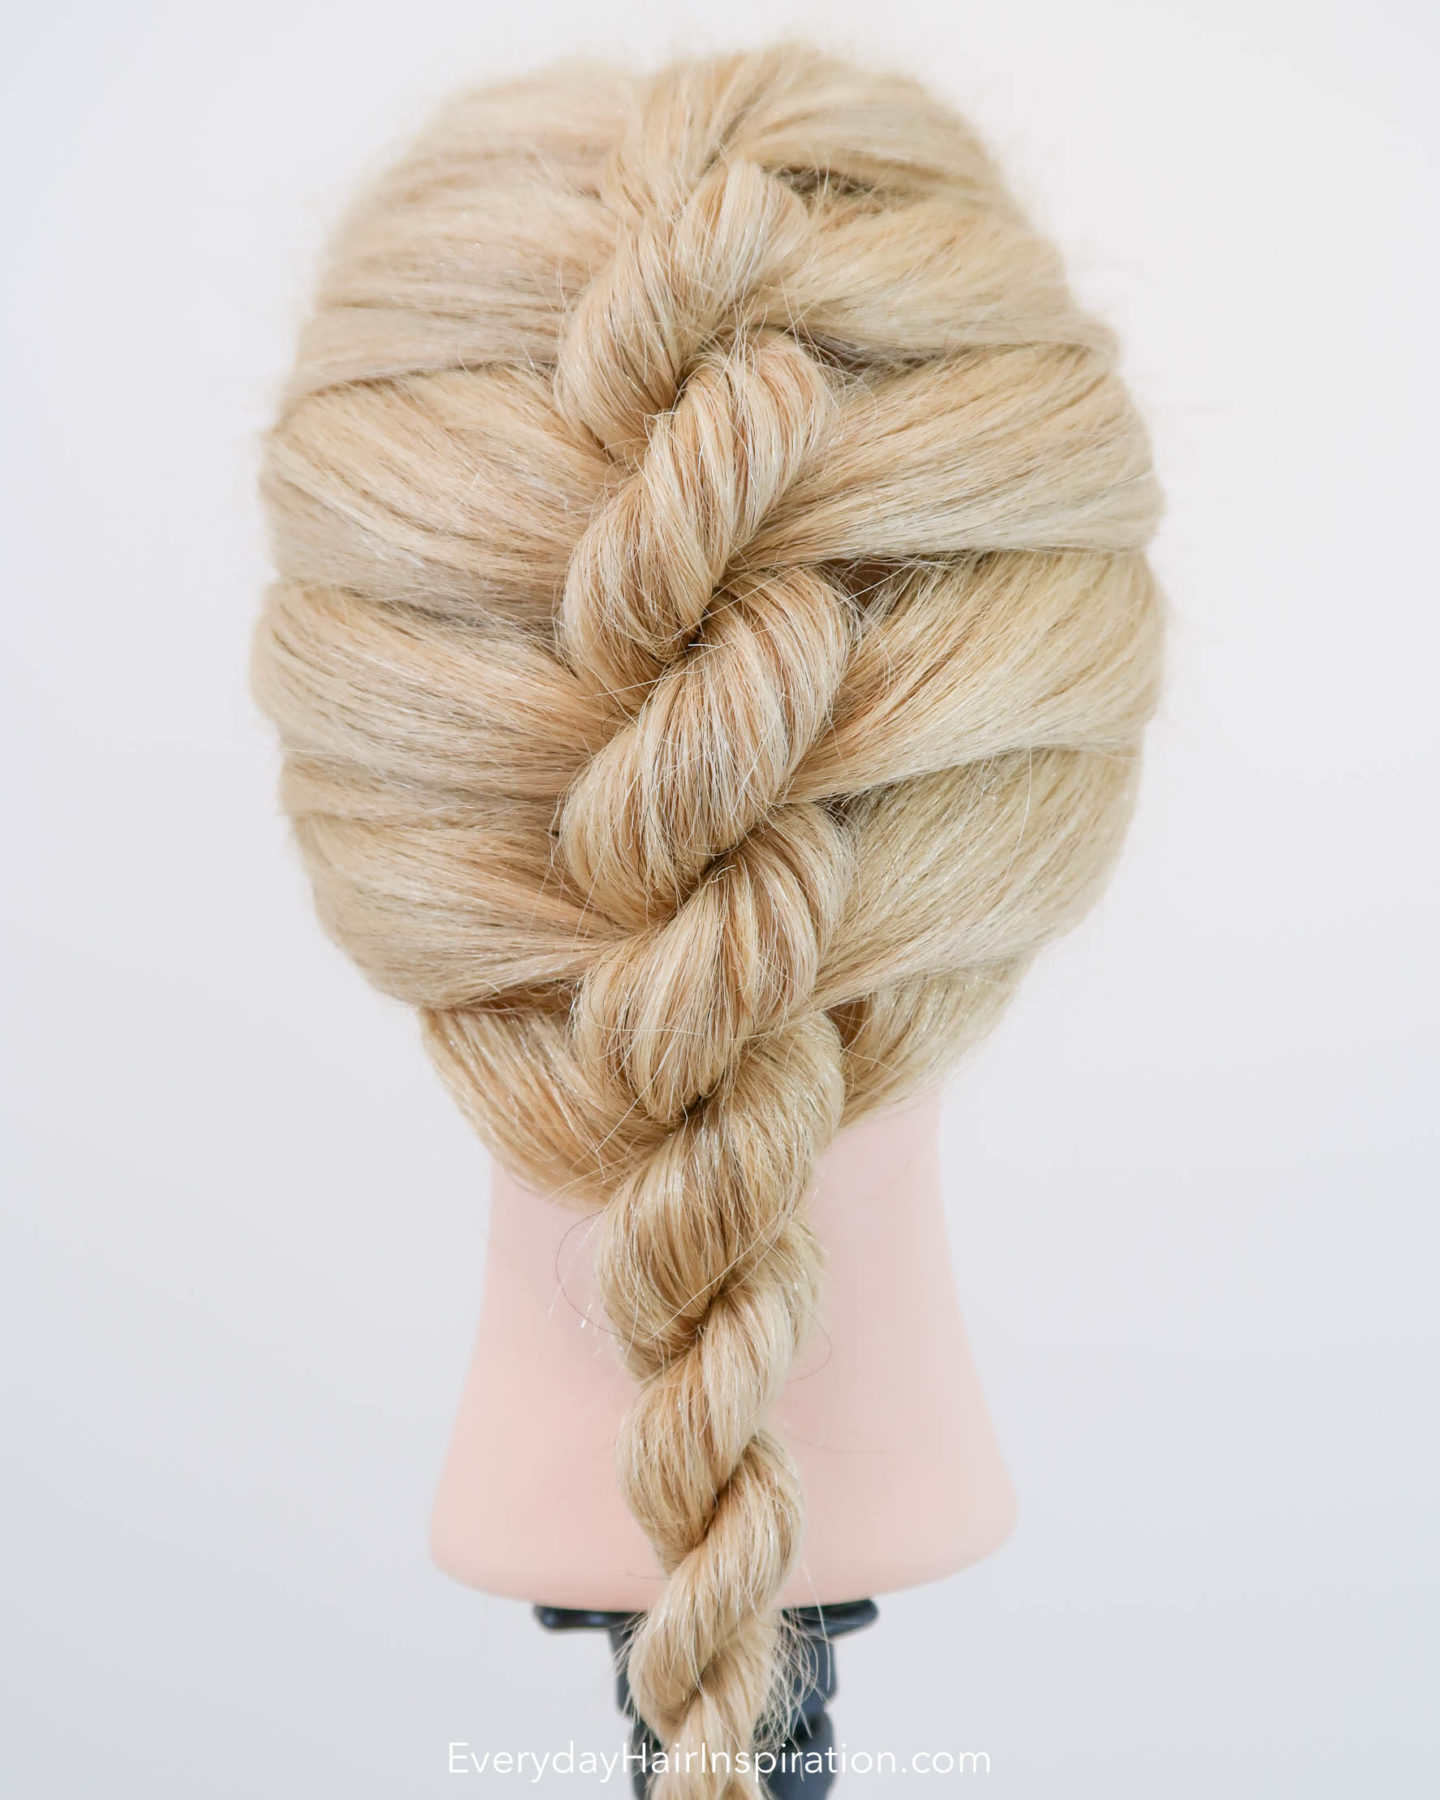 Blonde hairdresser doll with a single french rope braid in the hair - Looking at the braid straight on from the back